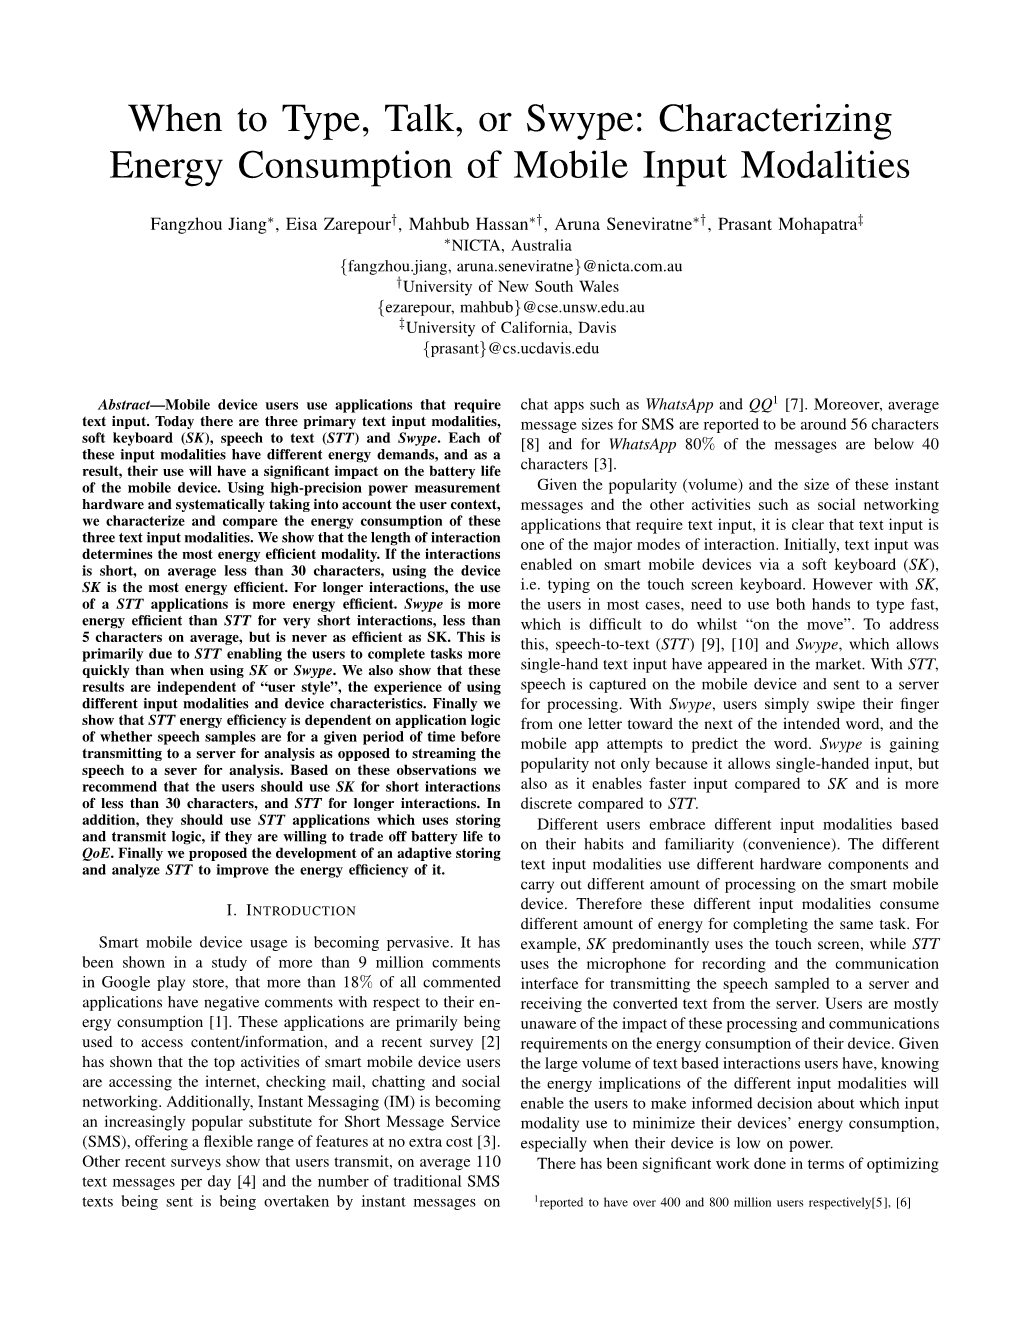 When to Type, Talk, Or Swype: Characterizing Energy Consumption of Mobile Input Modalities